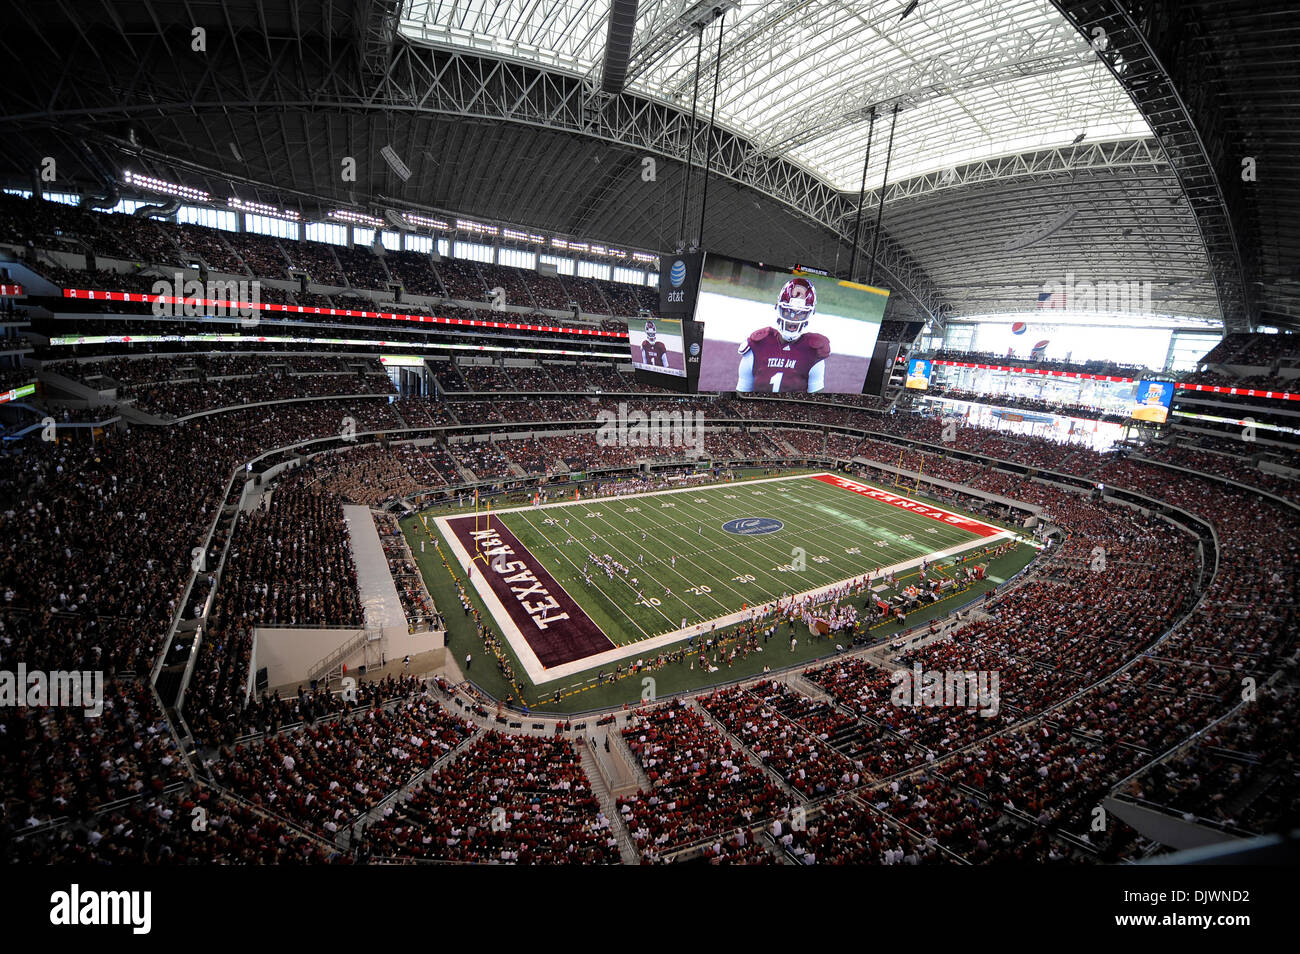 Oct. 9, 2010 - Arlington, Texas, United States of America - Dallas Cowboys Stadium in Arlington was the site of the game between the University of Arkansas and Texas A&M. The Razorbacks defeated the Aggies 24-17. (Credit Image: © Jerome Miron/Southcreek Global/ZUMApress.com) Stock Photo